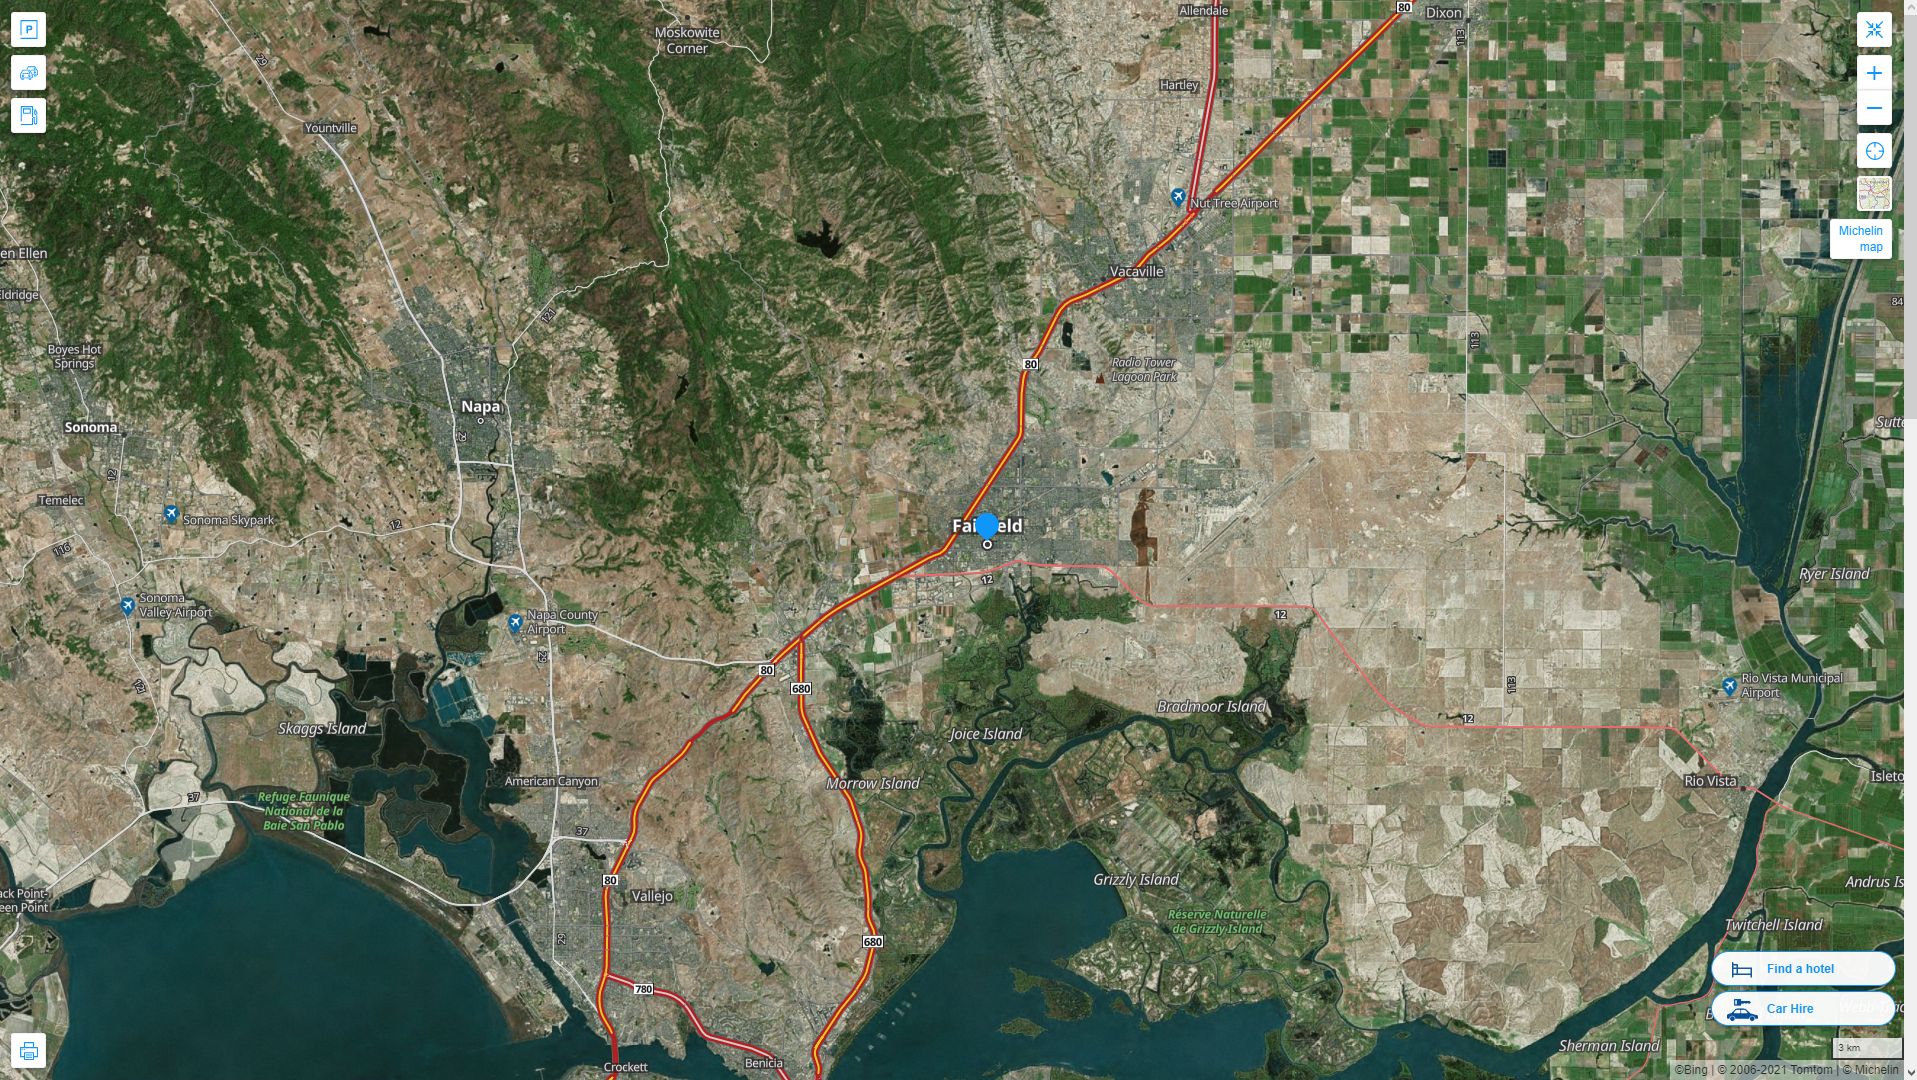 Fairfield California Highway and Road Map with Satellite View